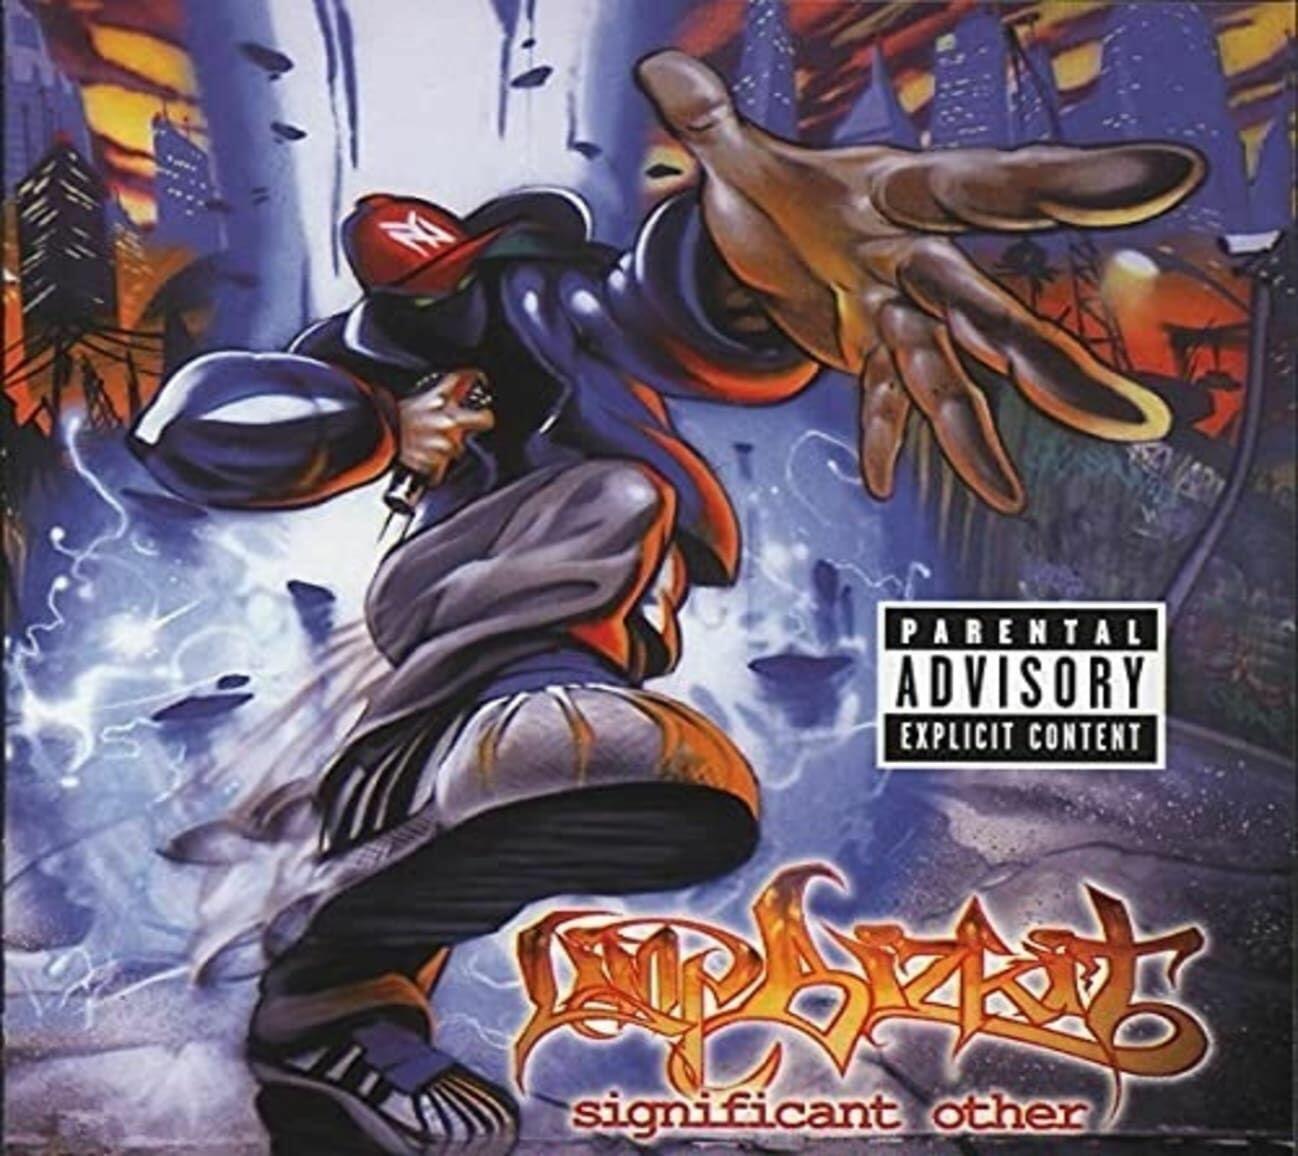 Limp Bizkit: Significant Other (CD) on MovieShack